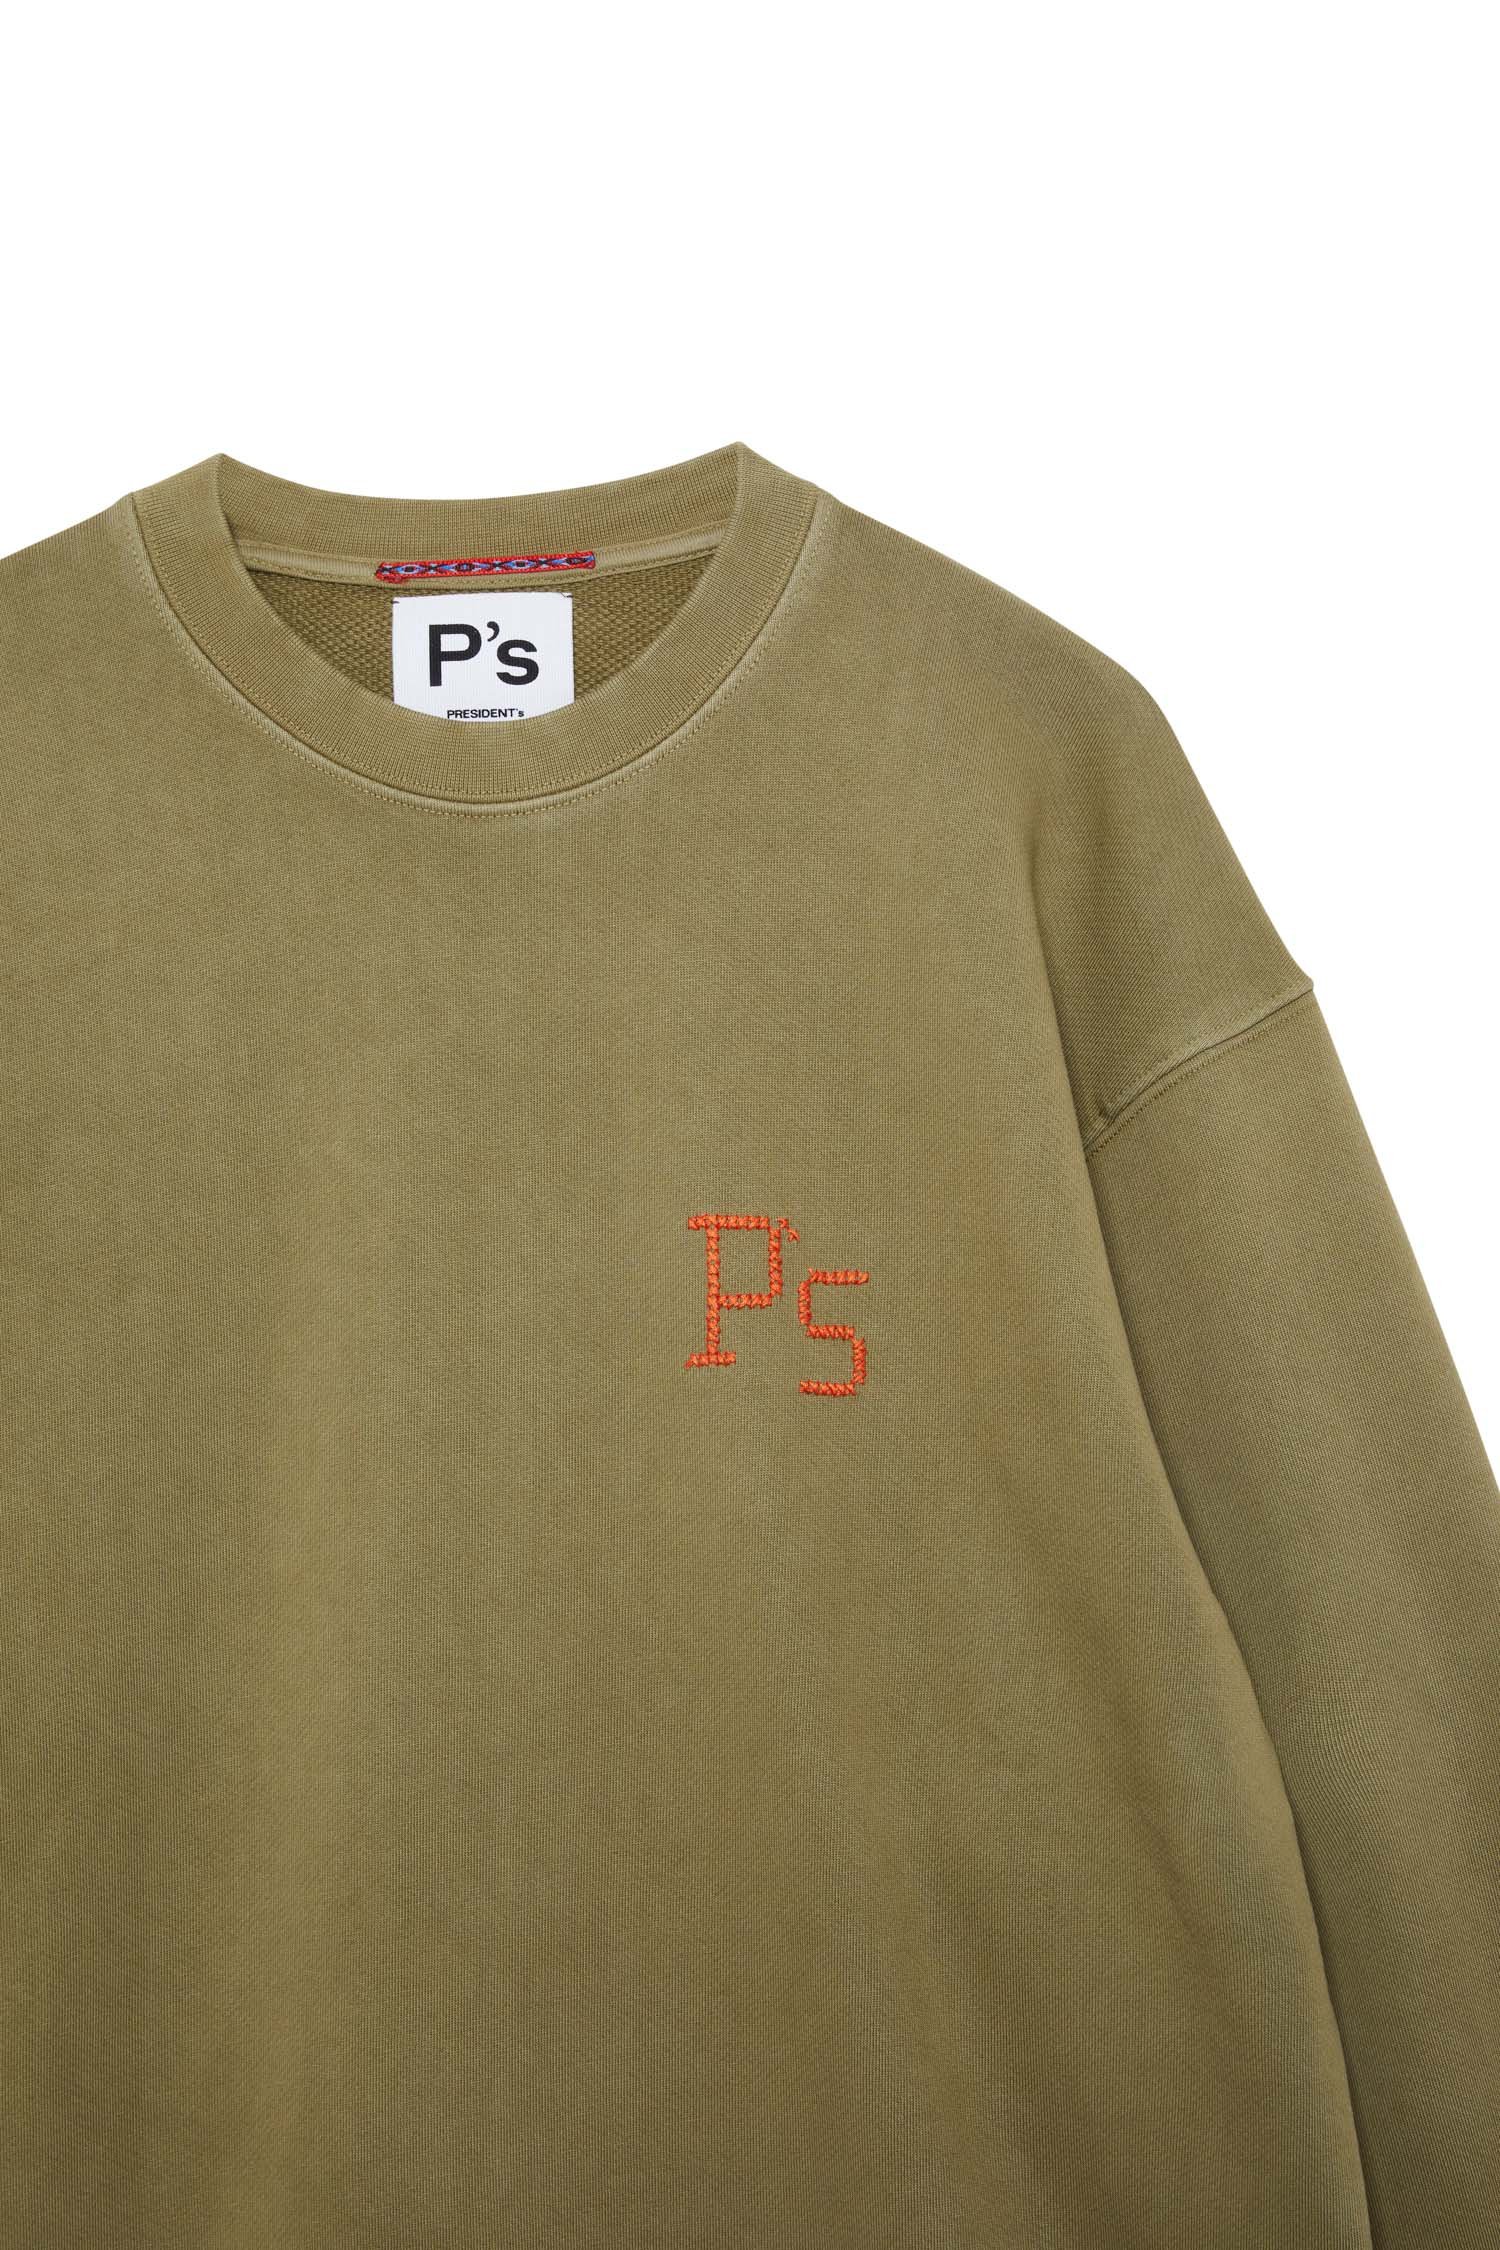 Image of PS PRESIDENTS CREW SWEATER